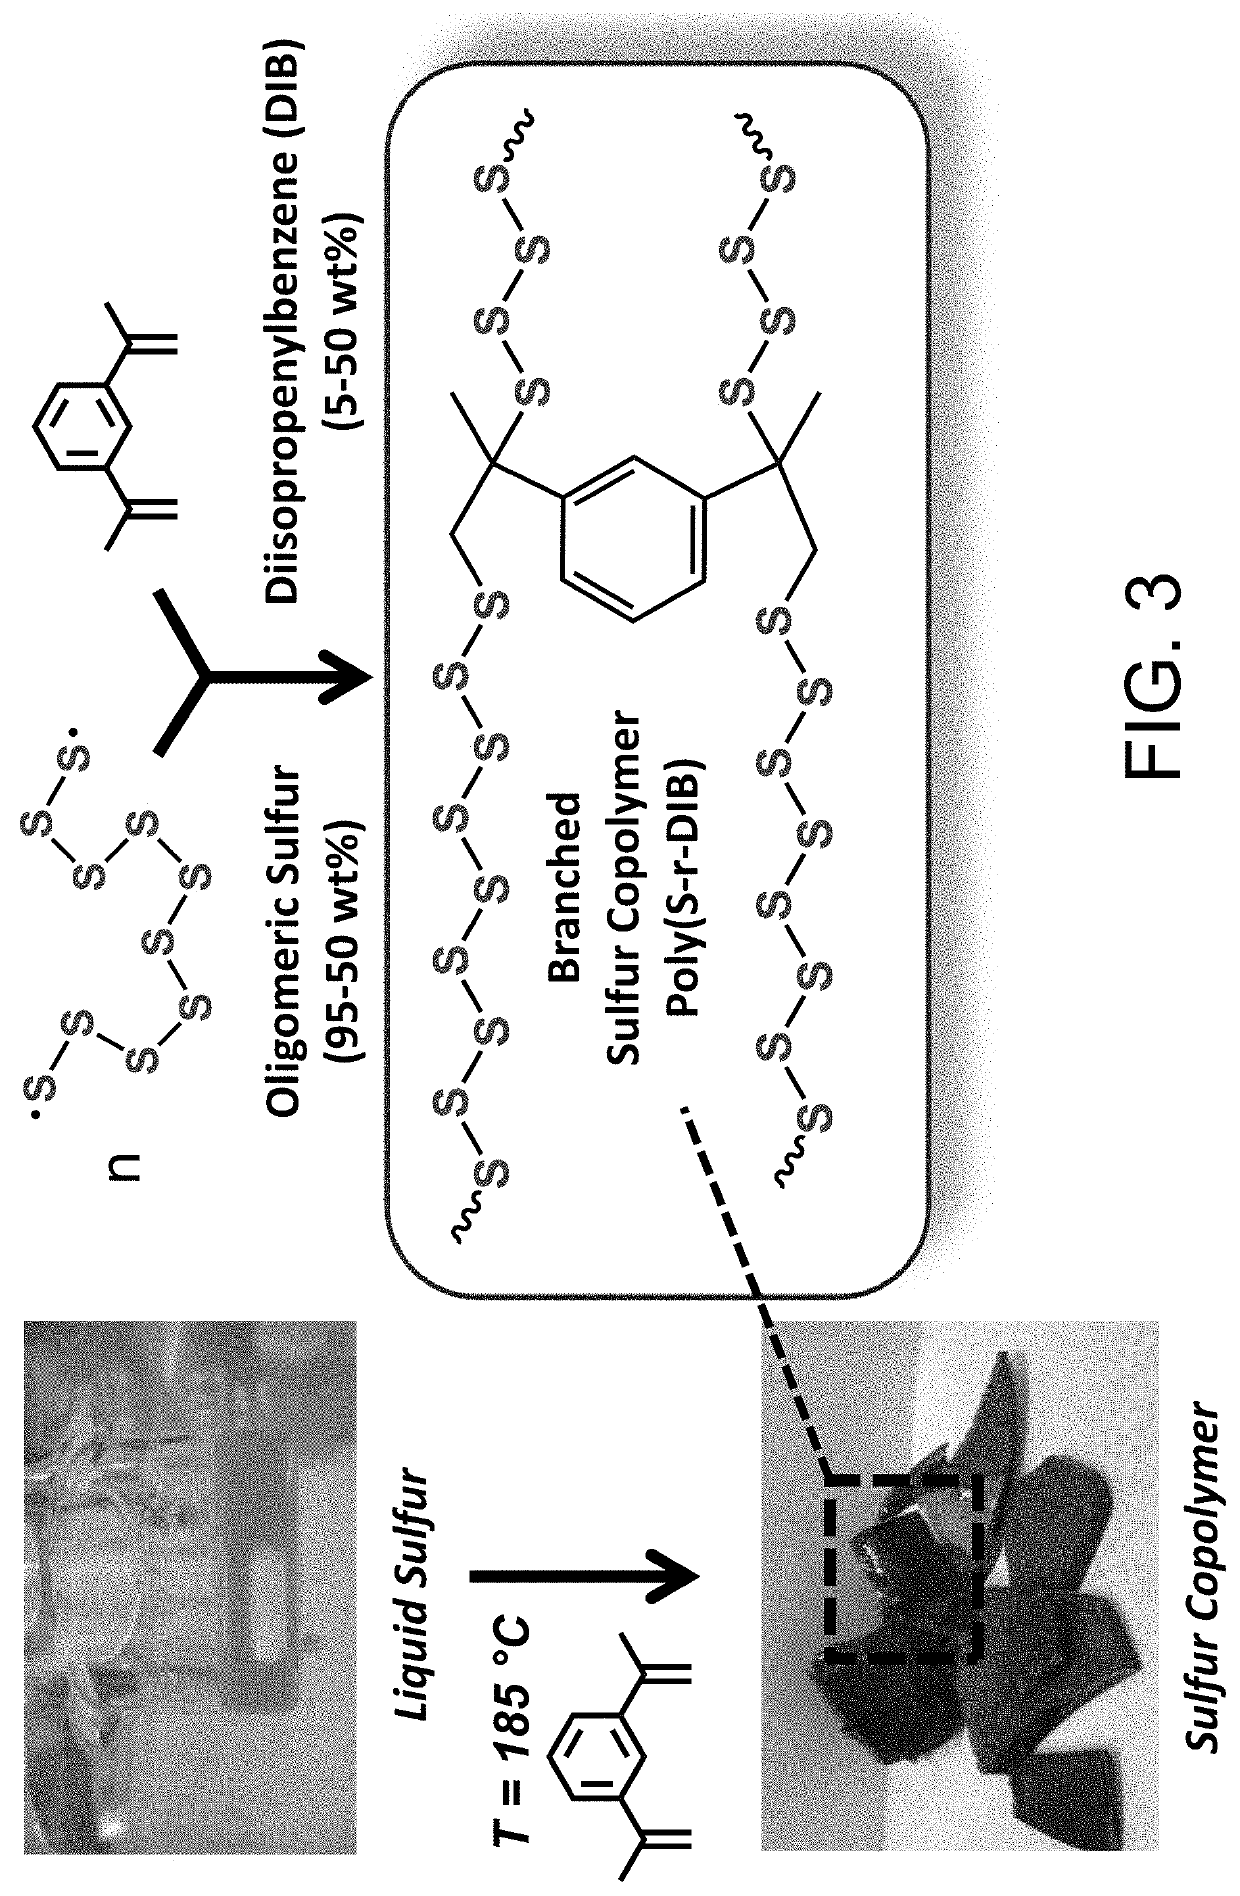 Sulfur composites and polymeric materials from elemental sulfur